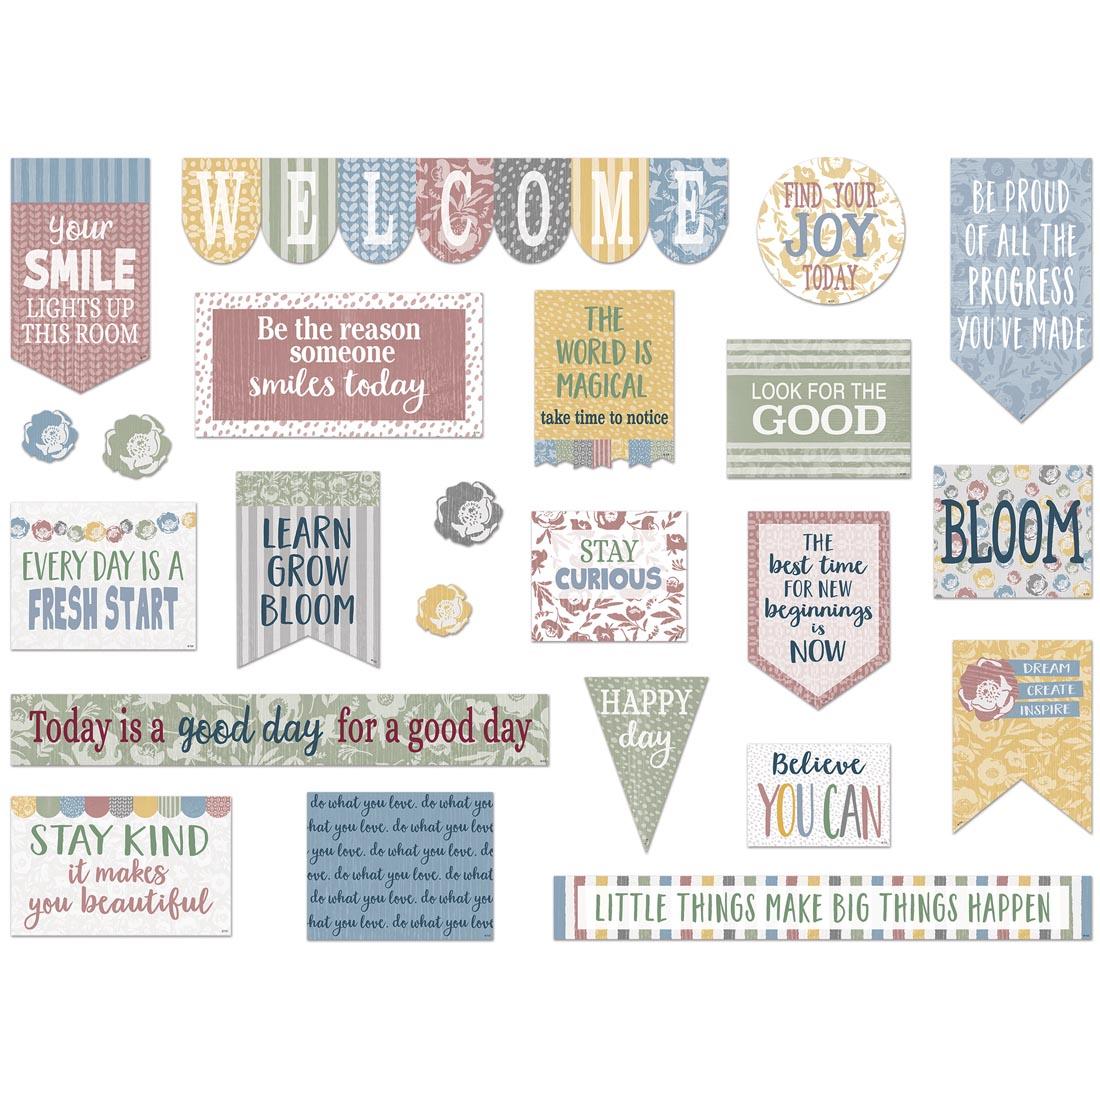 Mini Bulletin Board Set from the Classroom Cottage collection by Teacher Created Resources